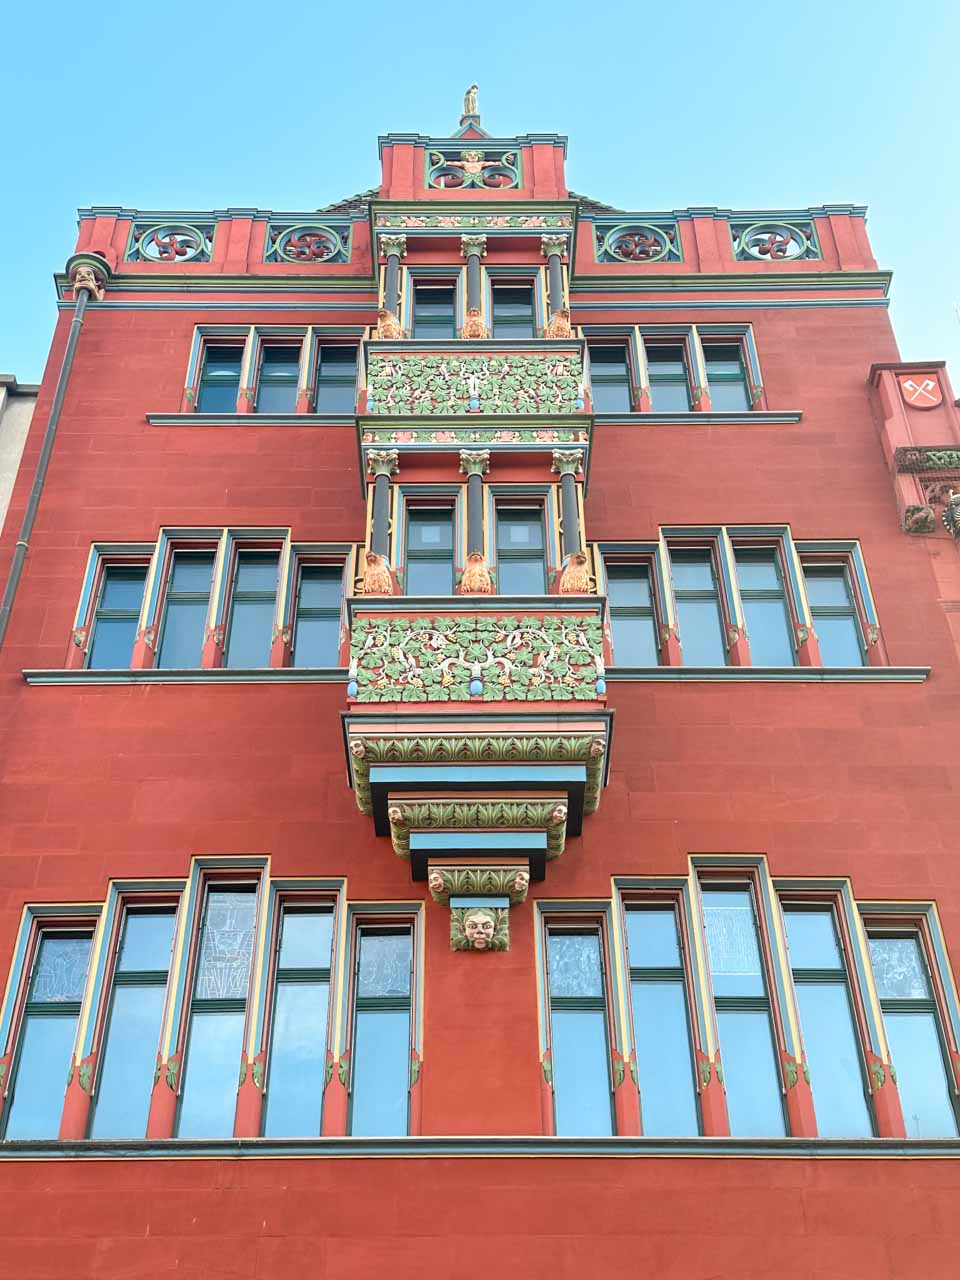 A detailed view of the vibrant green and red ornamental exterior of Basel Town Hall